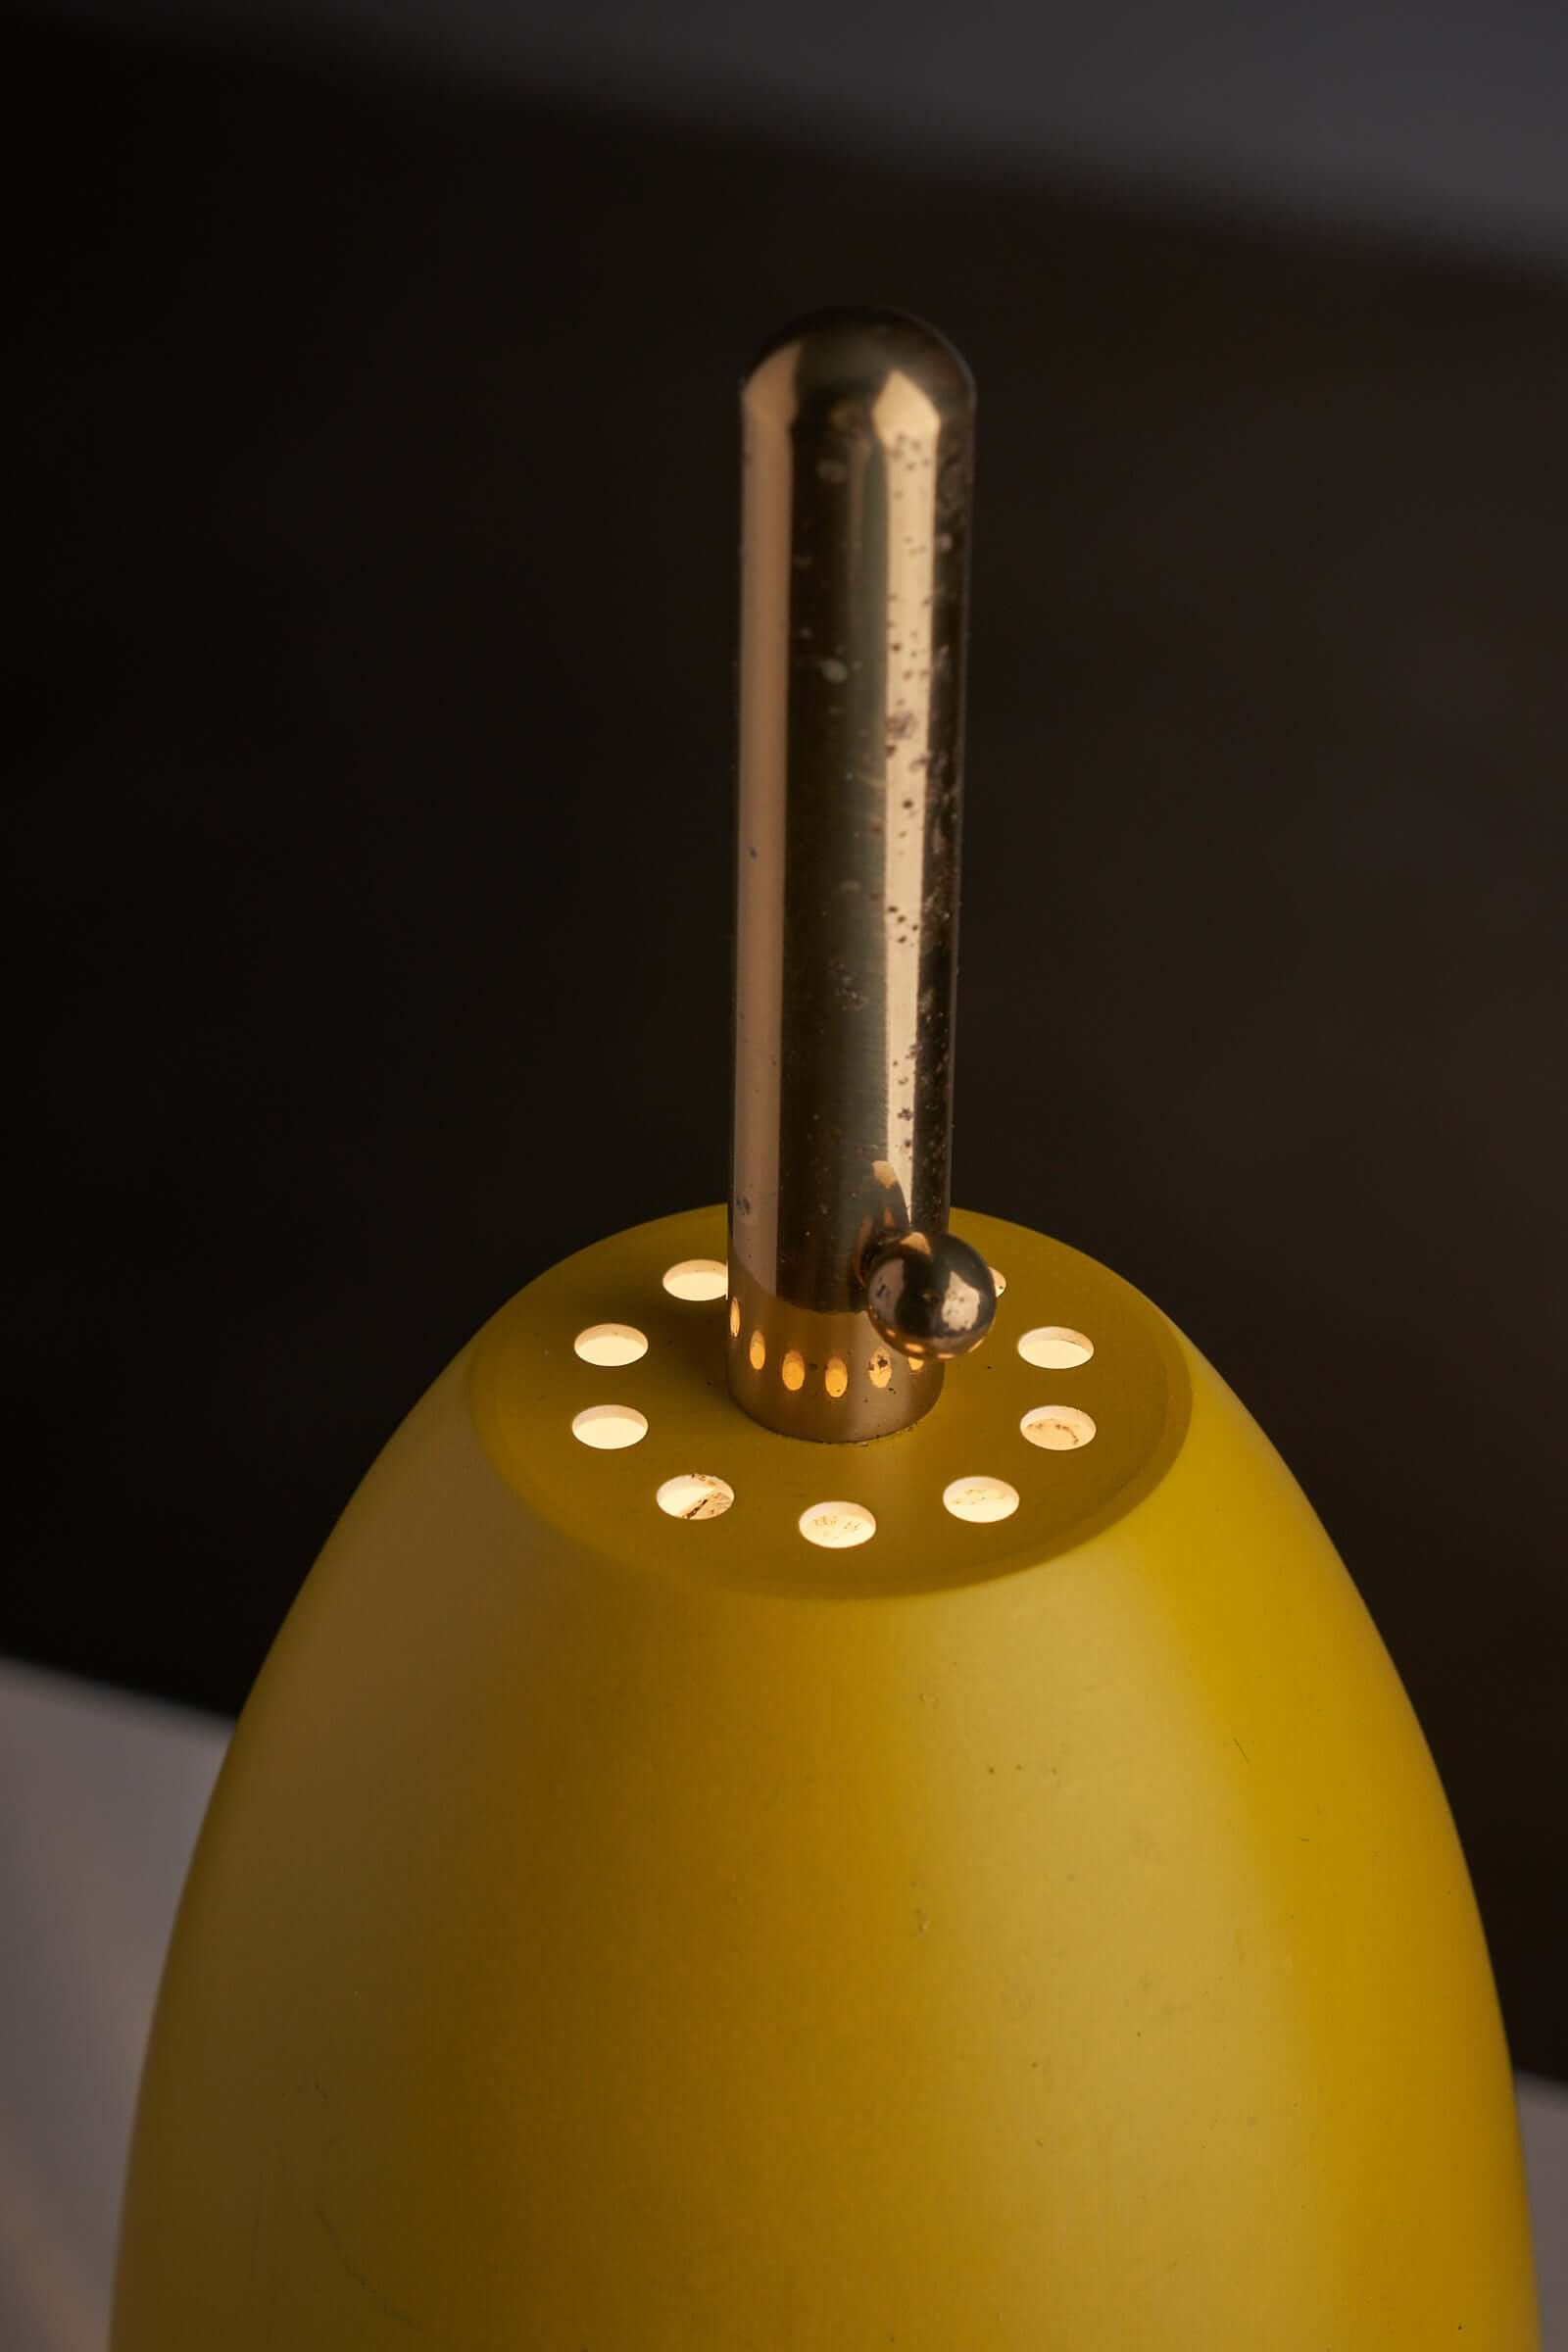 "Vintage-style brass lamp with metal shade"